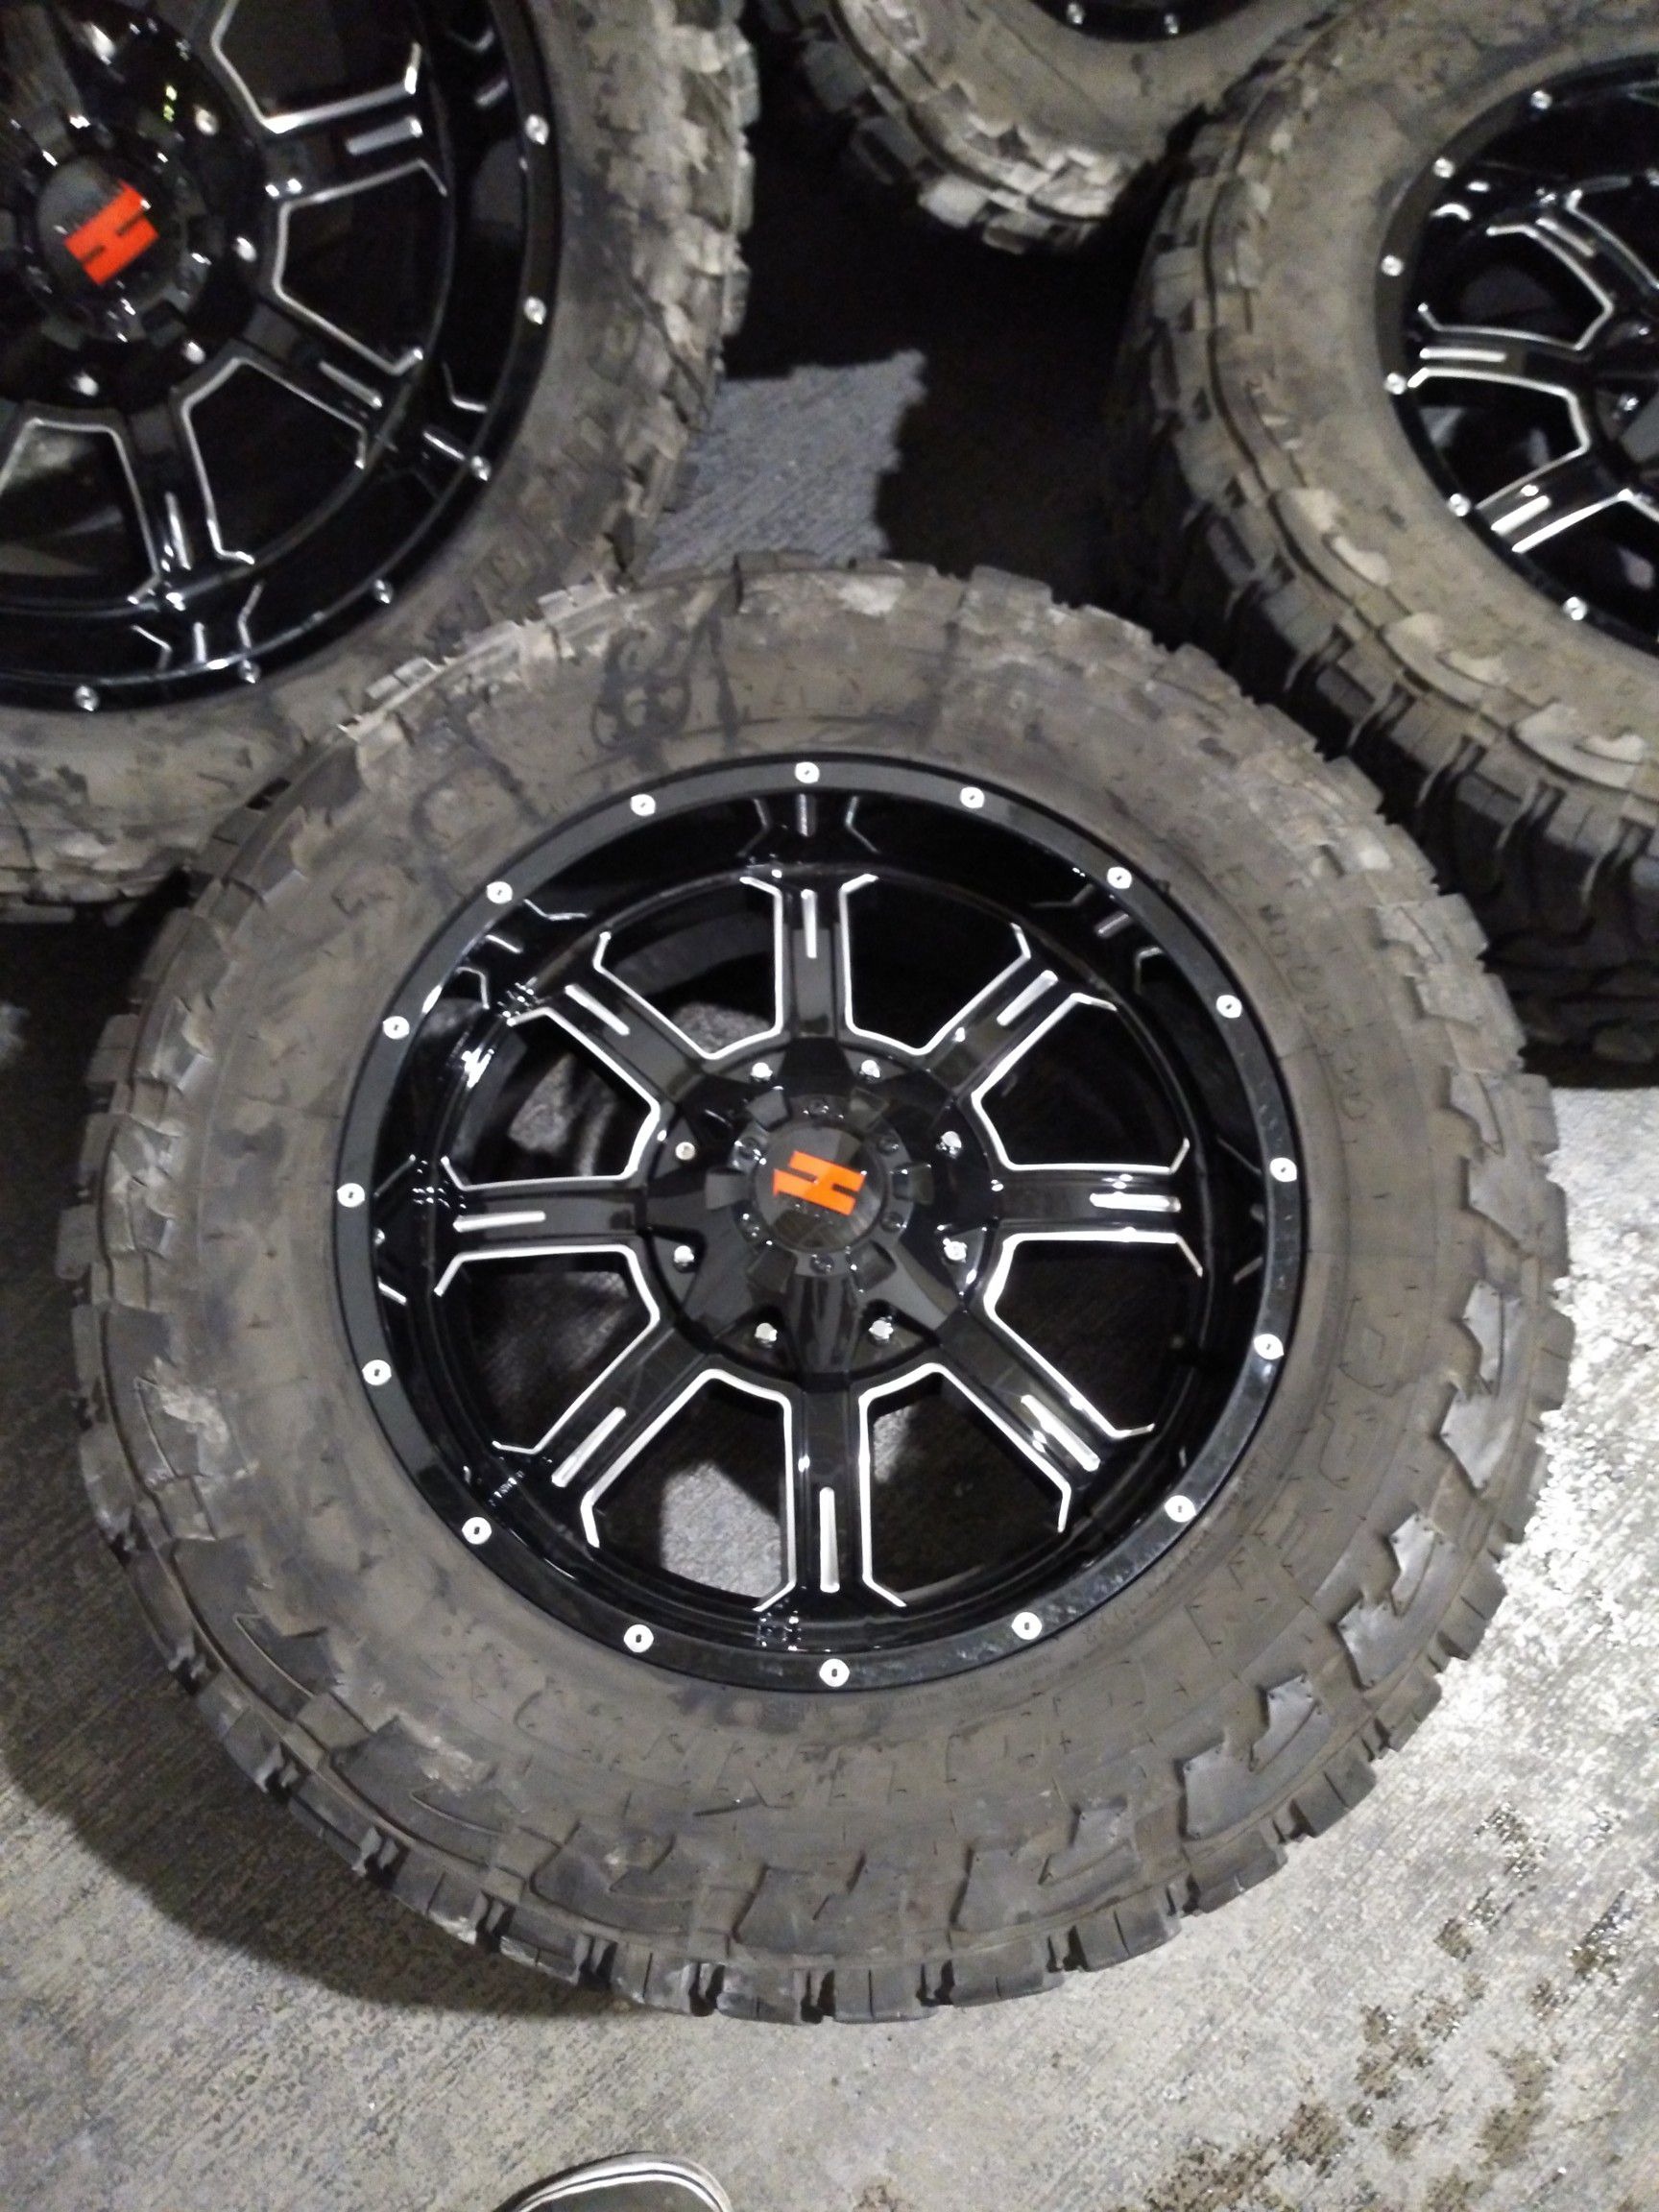 New 20 off road rims with Toyo open country tires